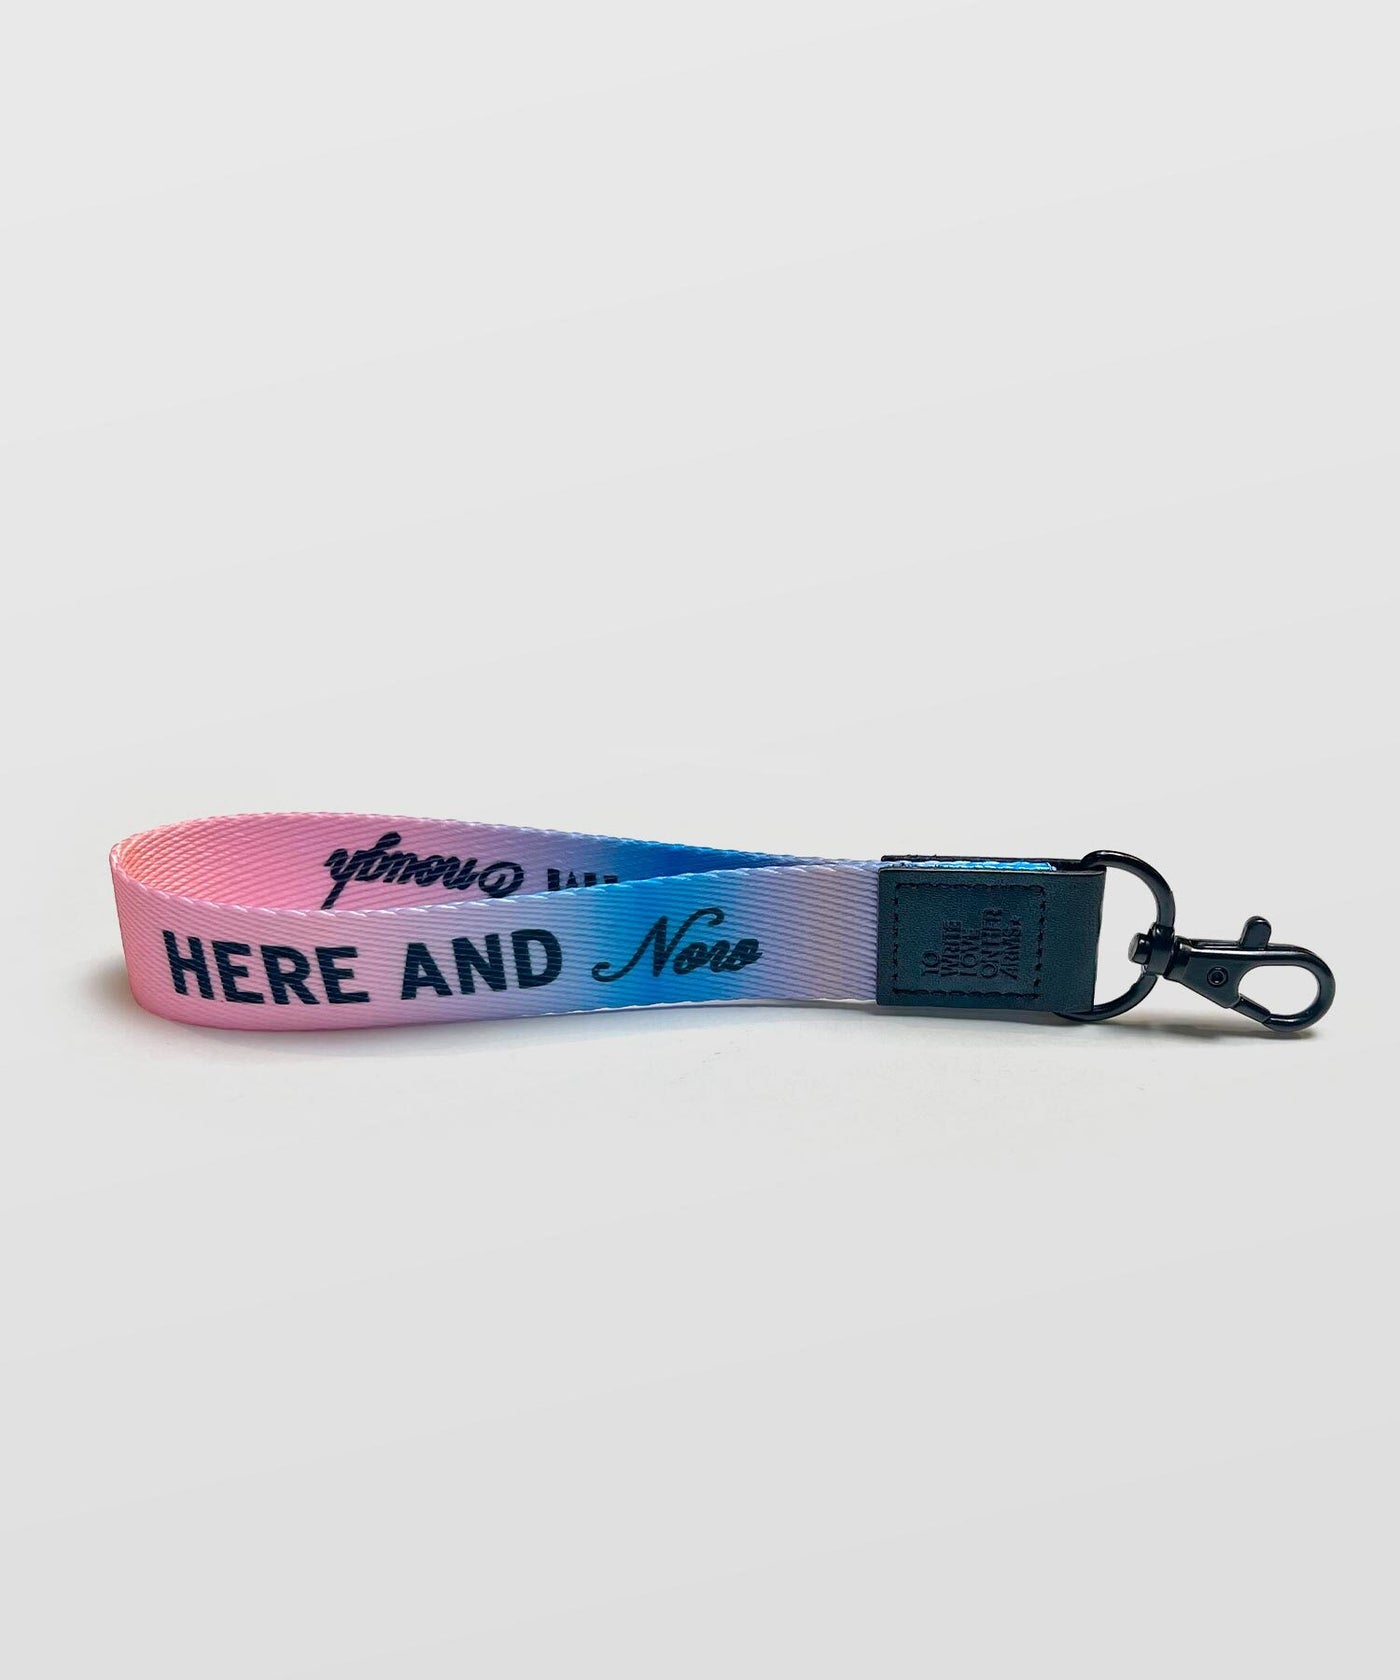 Enough Here and Now Wristlet Keychain